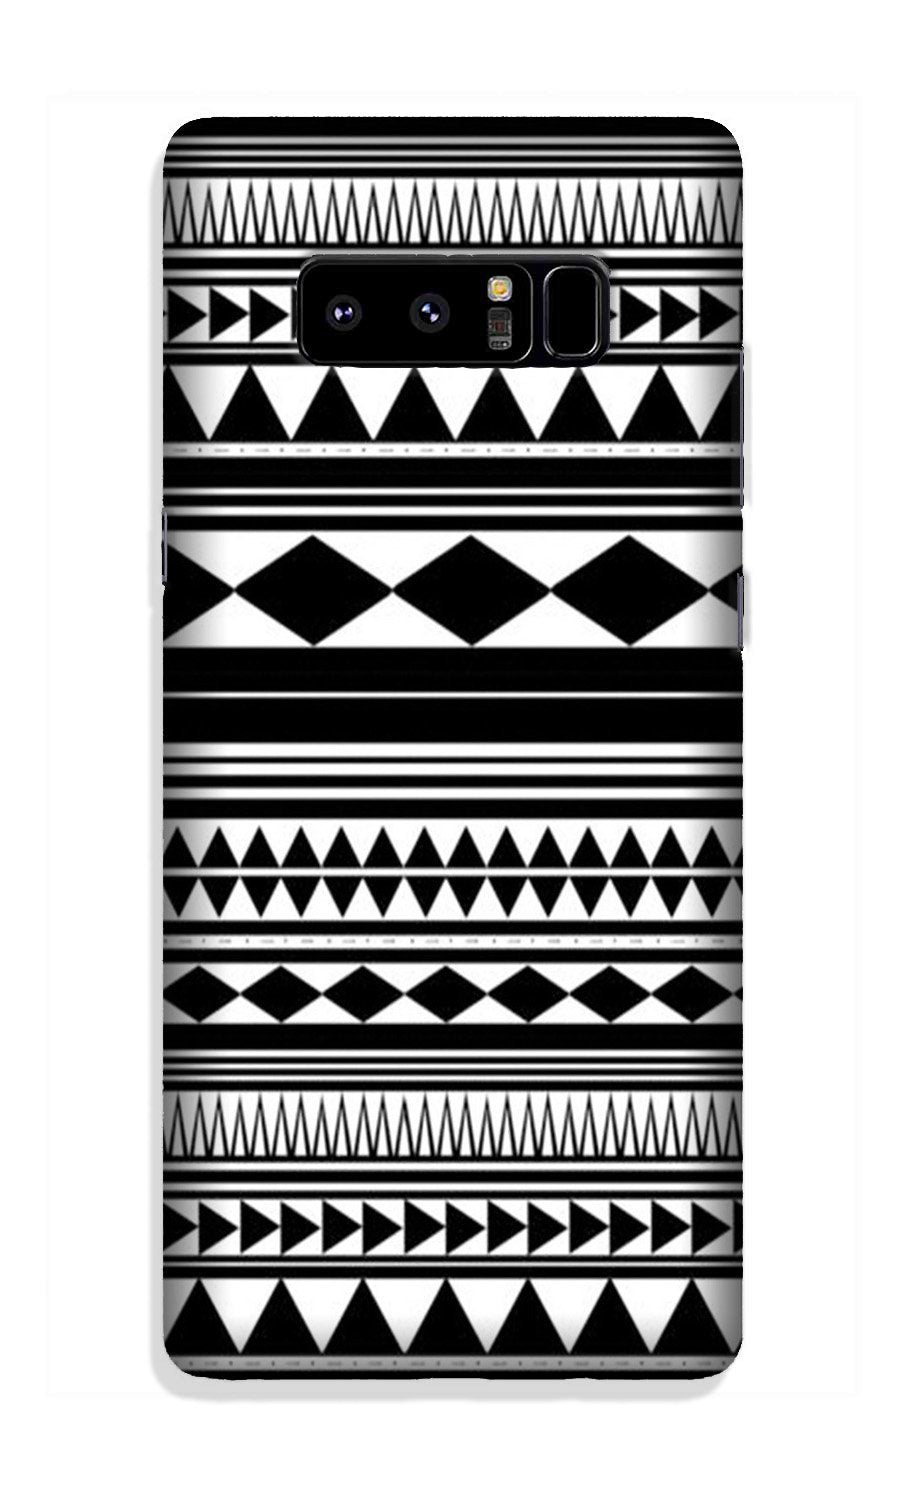 Black white Pattern Case for Galaxy Note 8